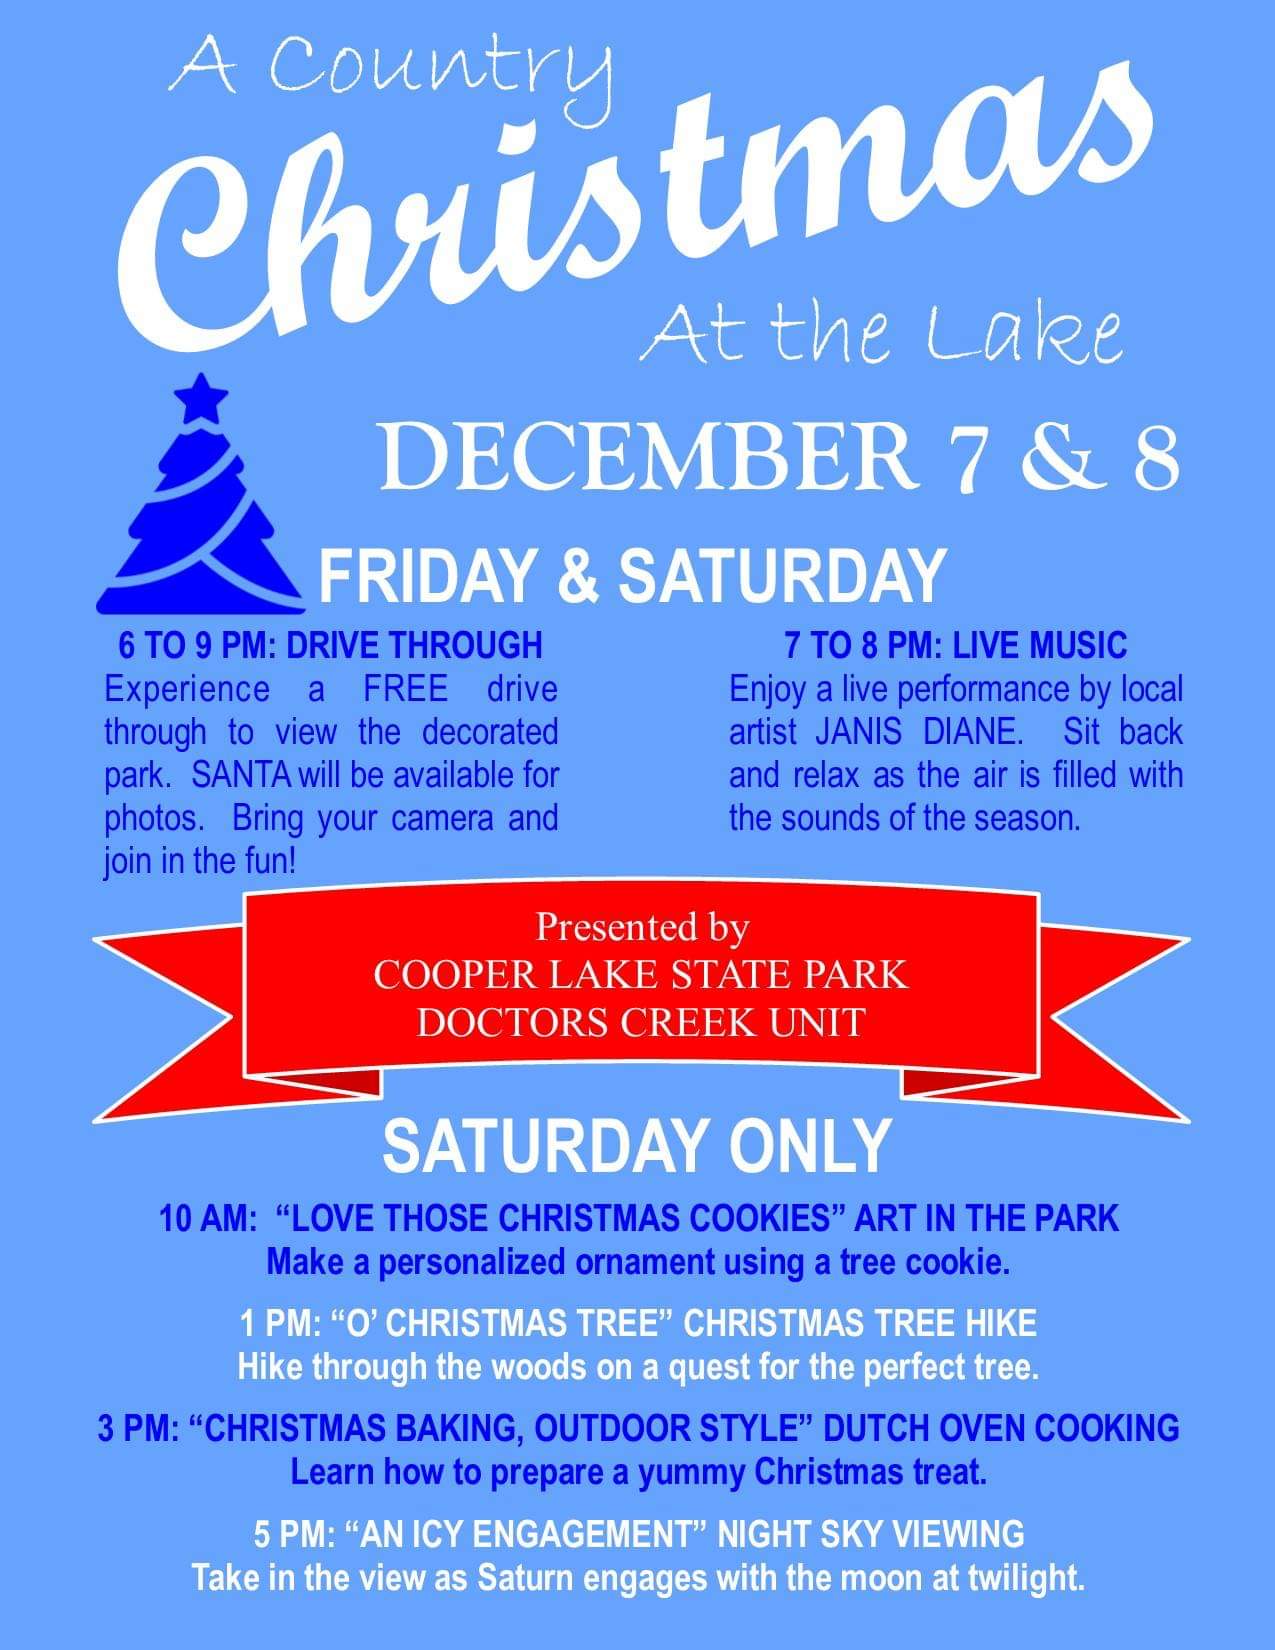 A Country Christmas at the Lake at Cooper Lake State Park Coming Up December 7th and 8th